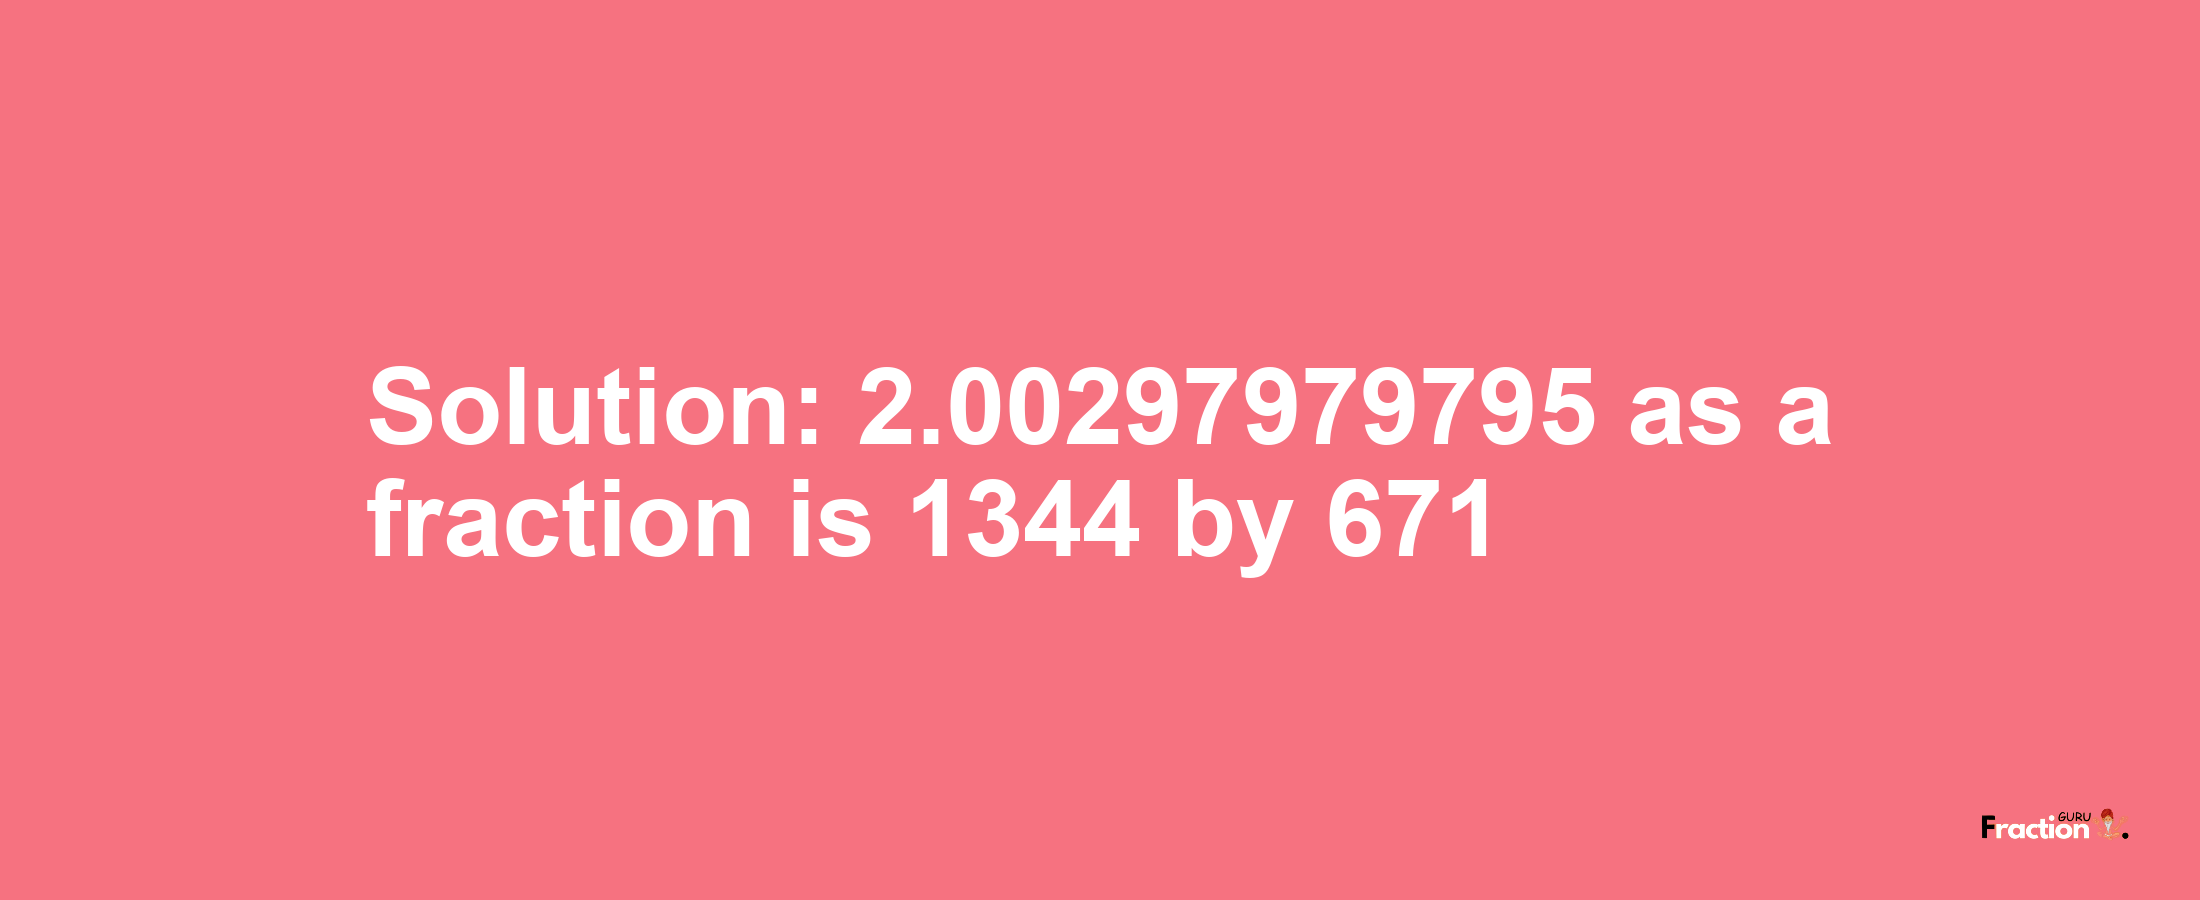 Solution:2.00297979795 as a fraction is 1344/671